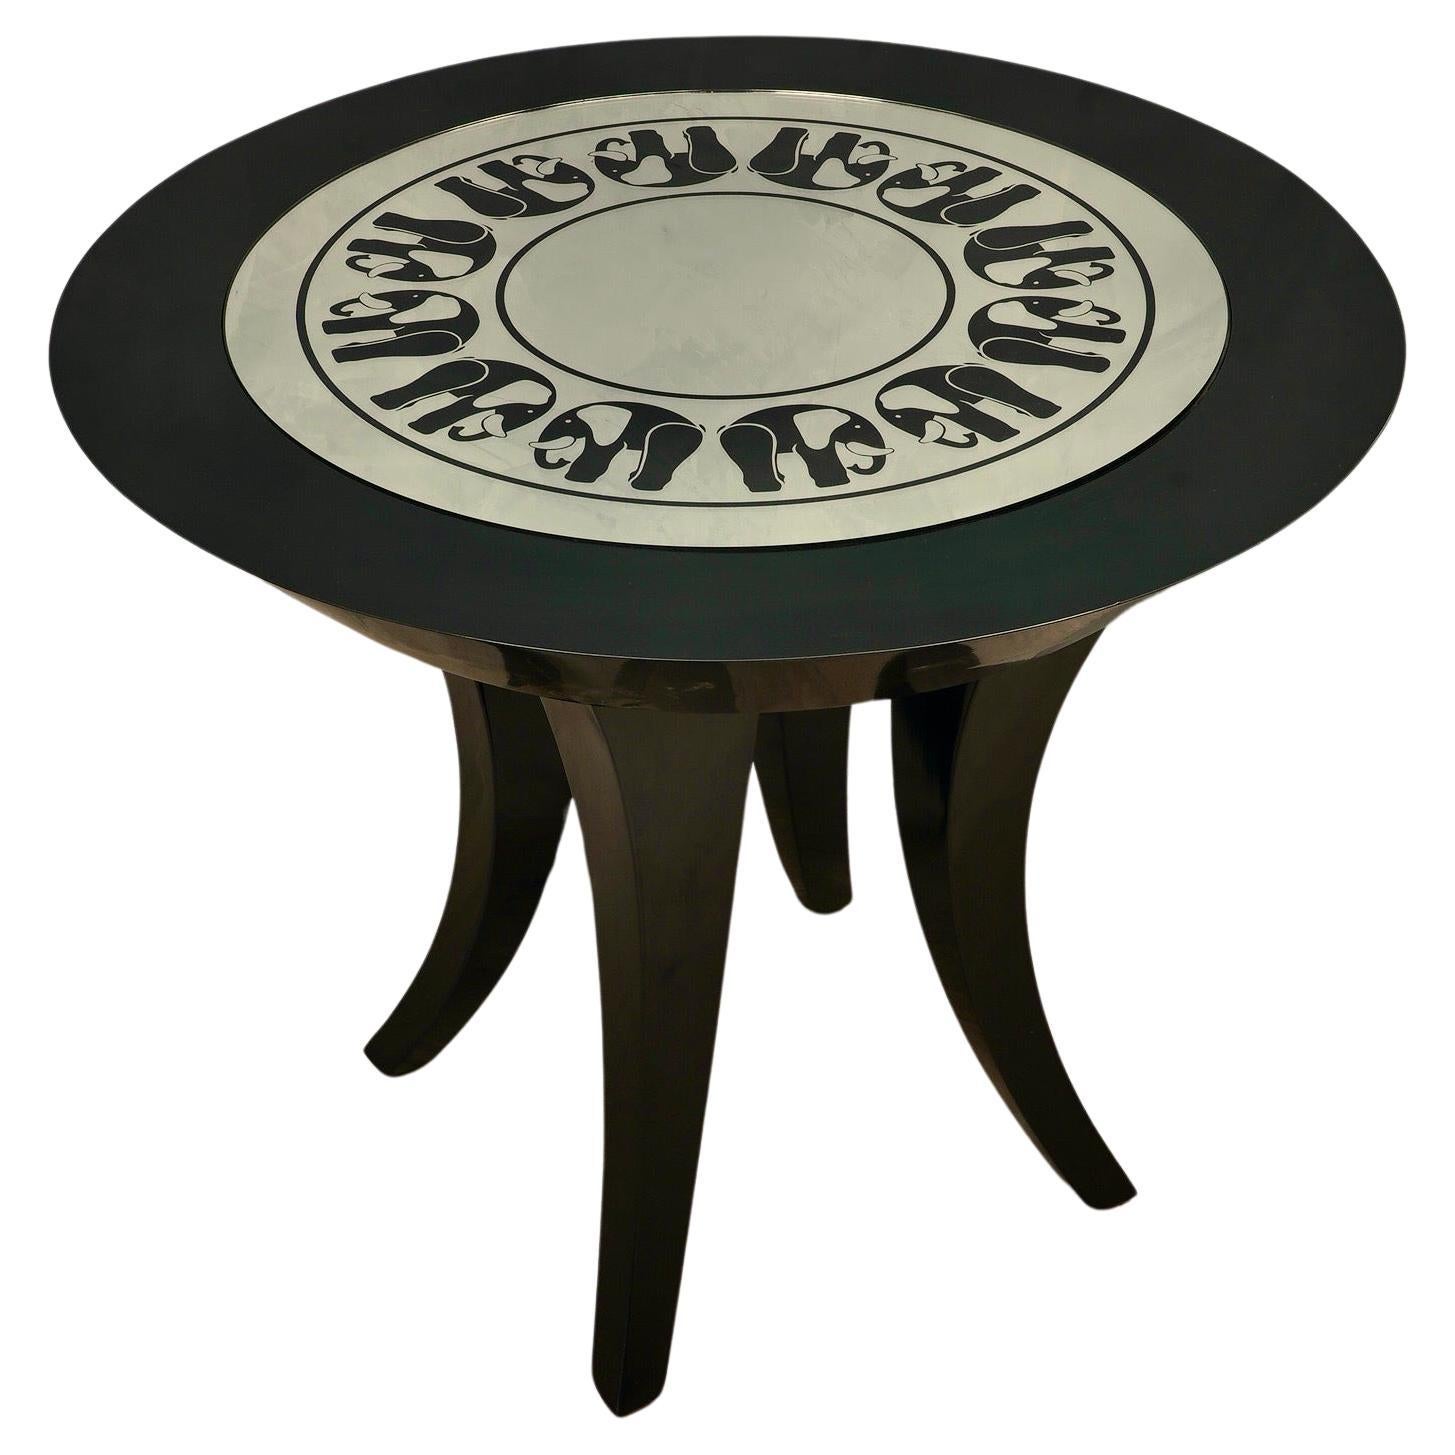 Midcentury Black Shellac and Engraved Mirror Italian Side Table, 1980 For Sale